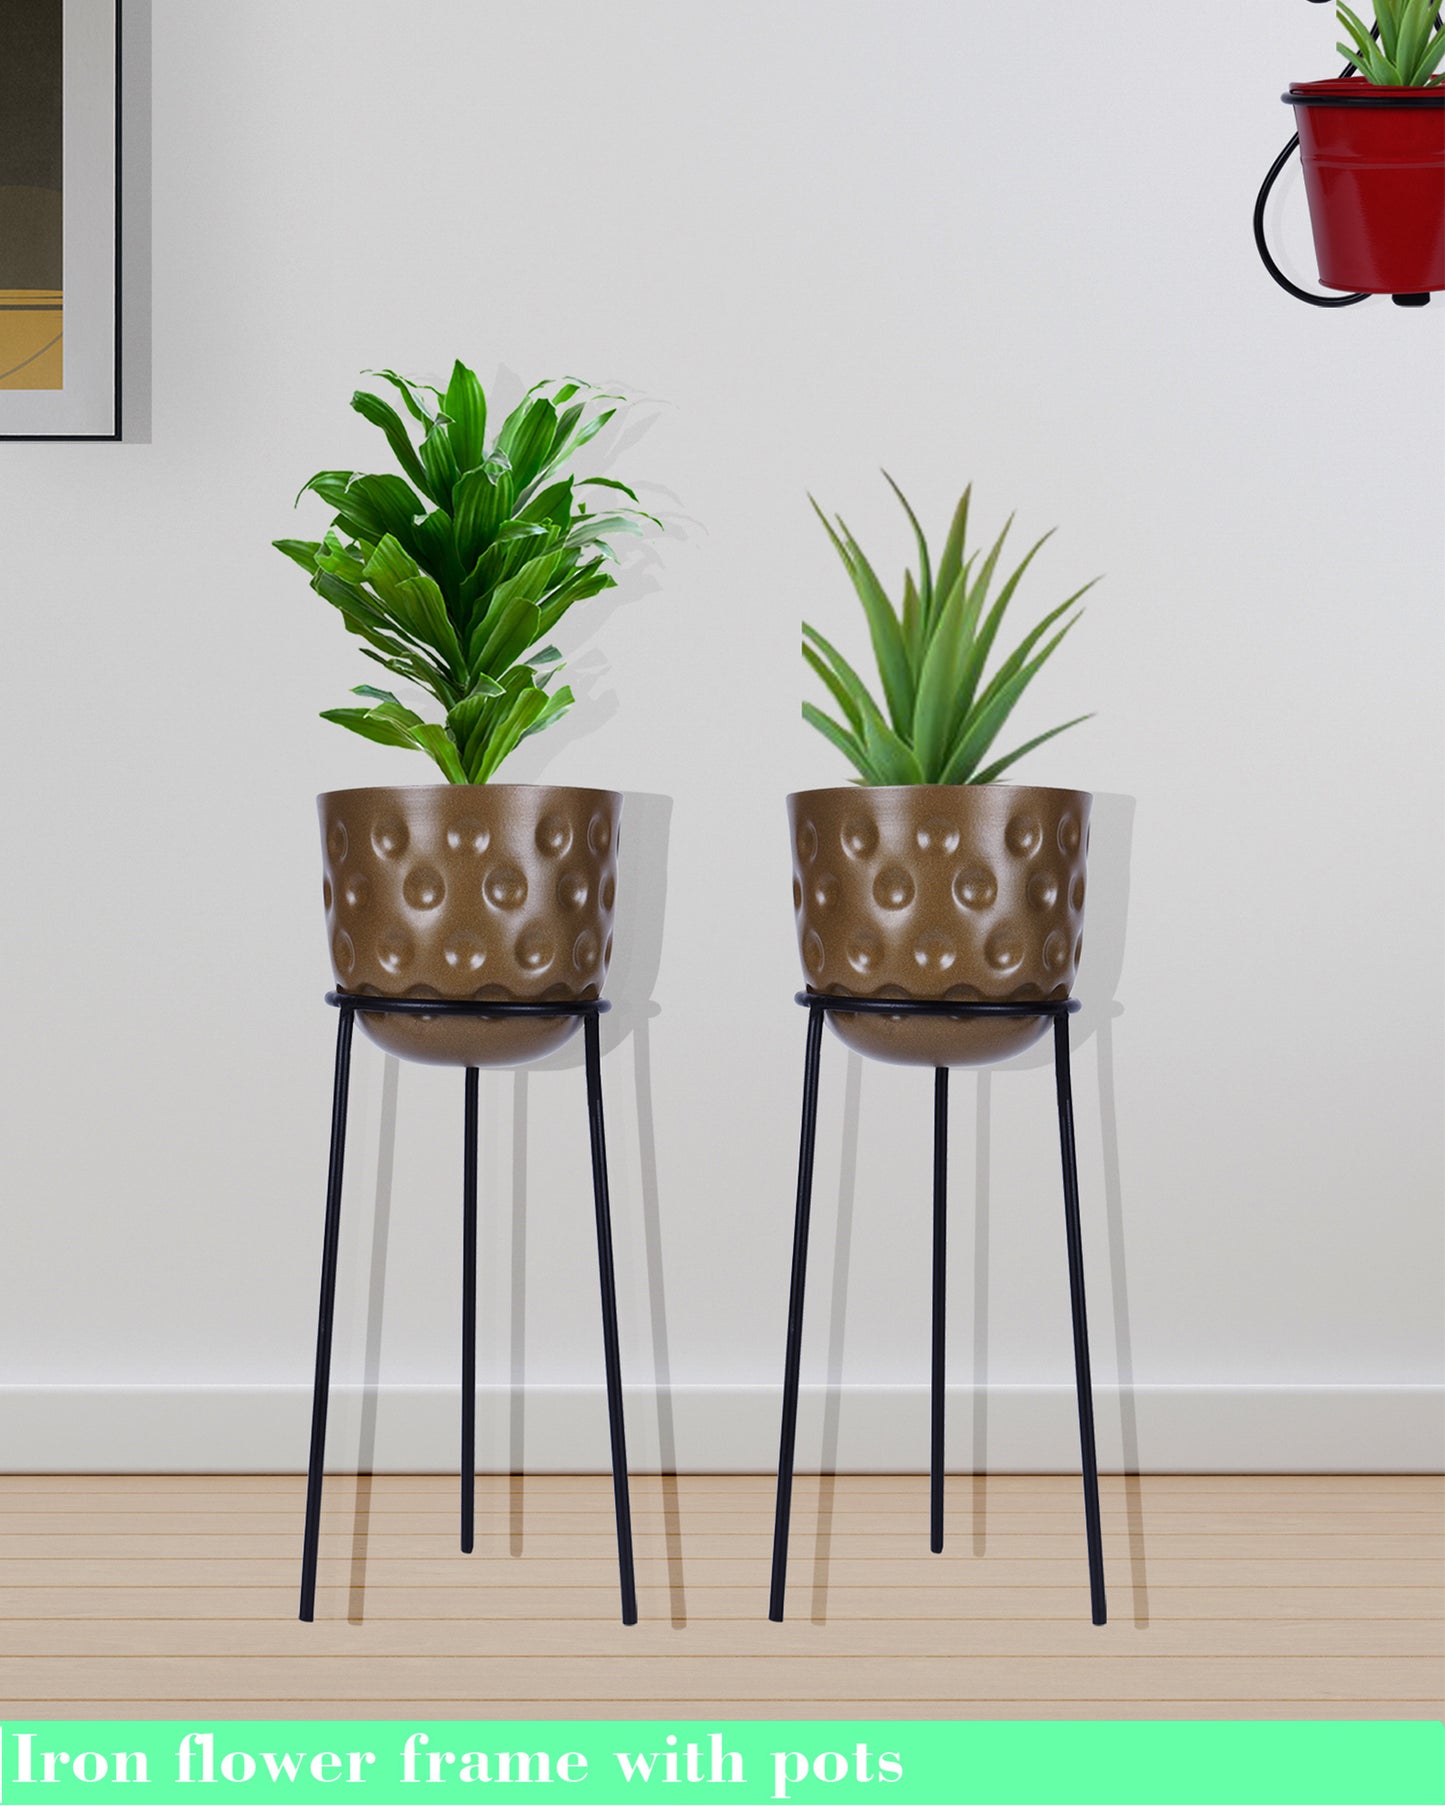 Metal Hammered Plant Pot with Stand, Set of 2 |Golden Decorative Modern Indoor Planter | Office Desk Pot with Black Metal Stand for Orchids Herbs Cacti Succulents